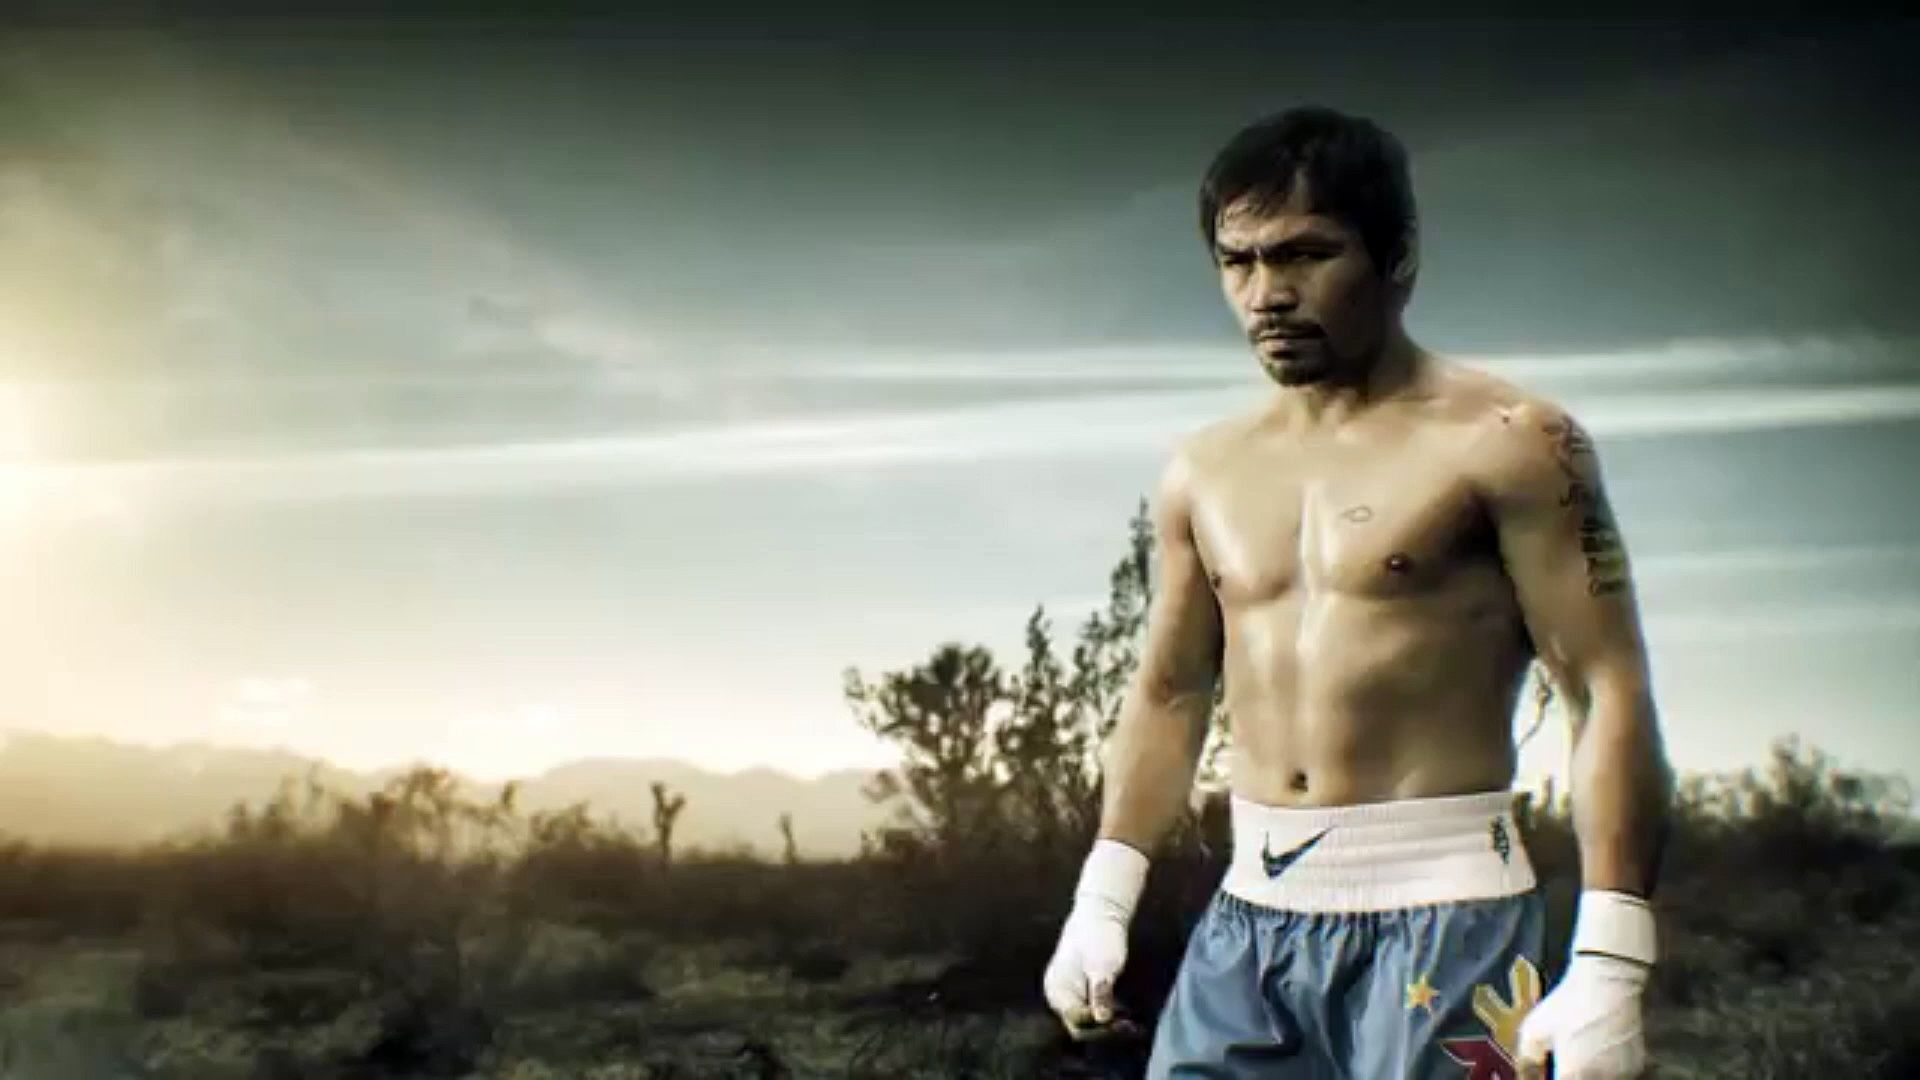 Manny pacquiao hd wallpaper Free hd wallpapers for desktop, High resolution